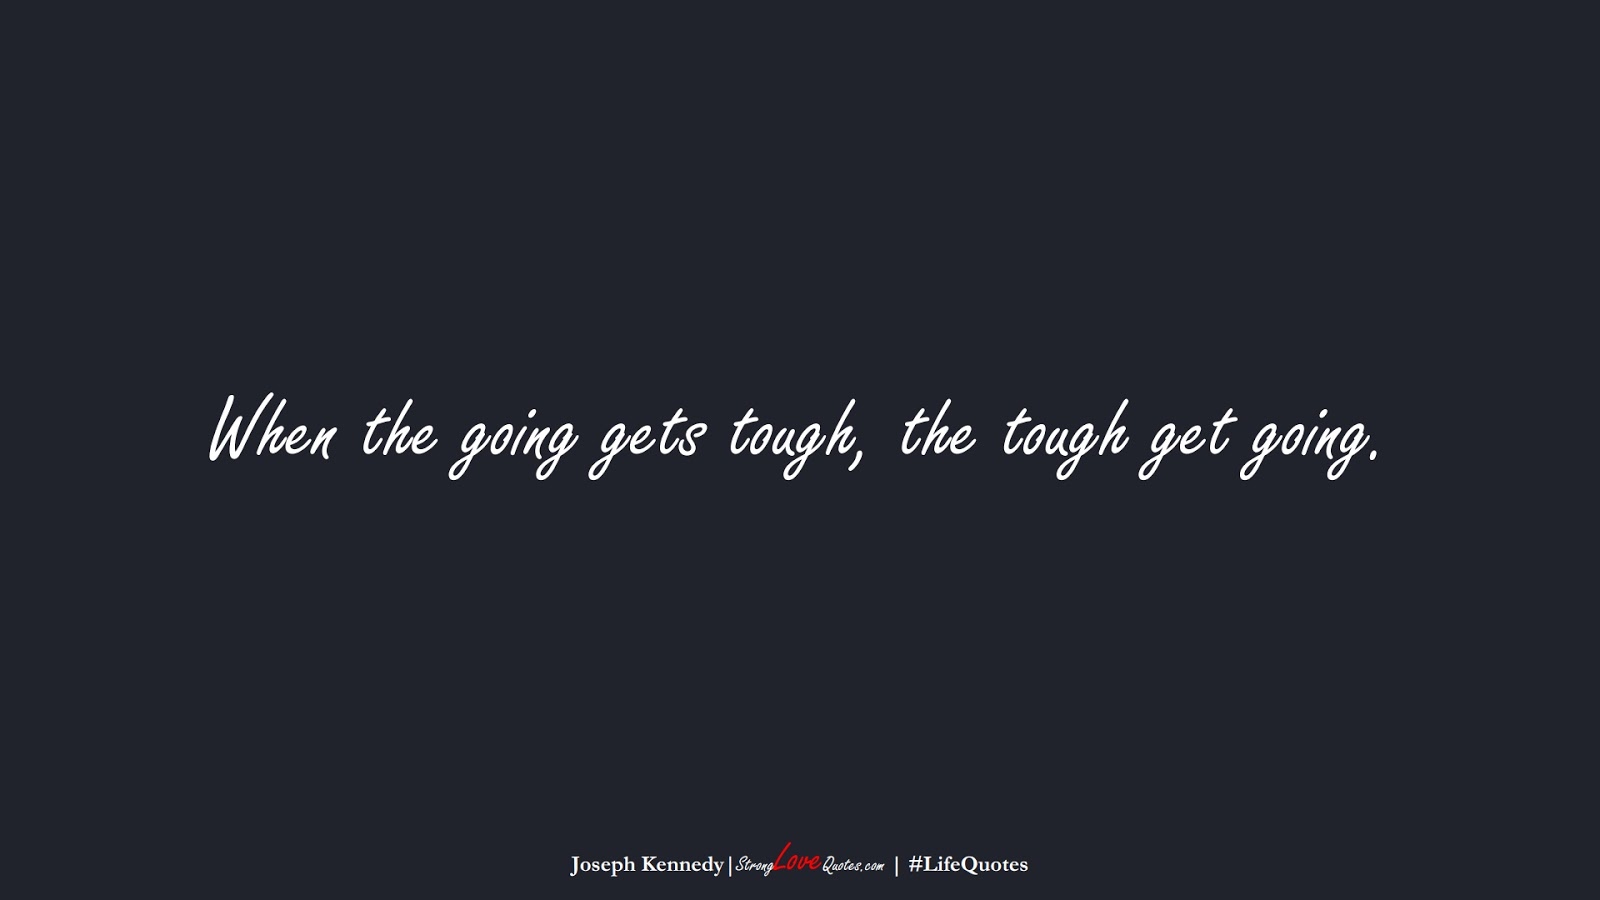 When the going gets tough, the tough get going. (Joseph Kennedy);  #LifeQuotes